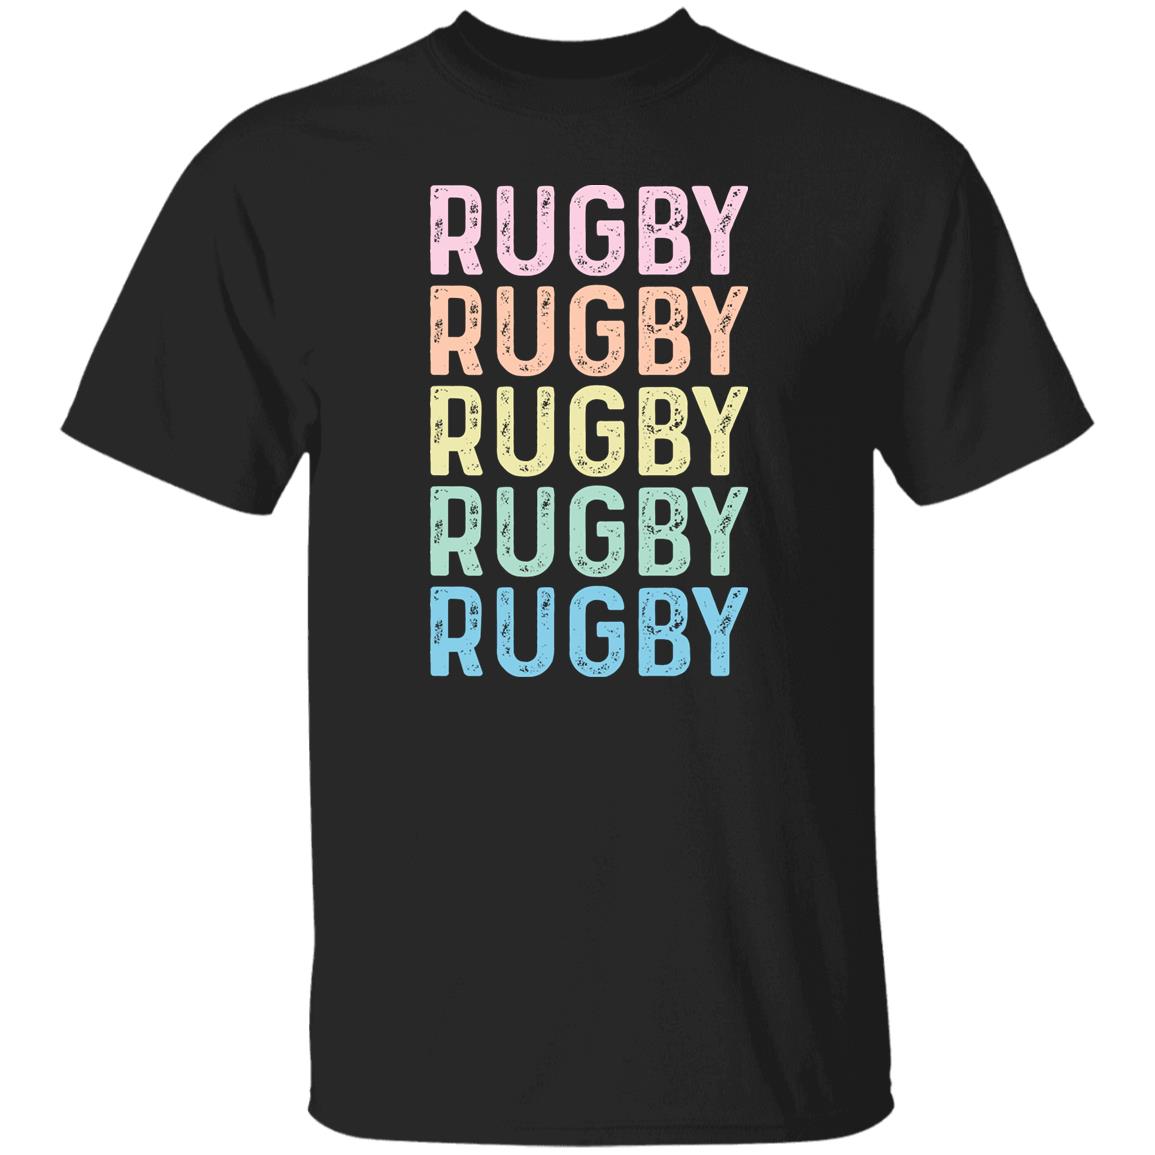 Rugby Unisex Shirt, Rugby player tee Black S-2XL-Black-Family-Gift-Planet